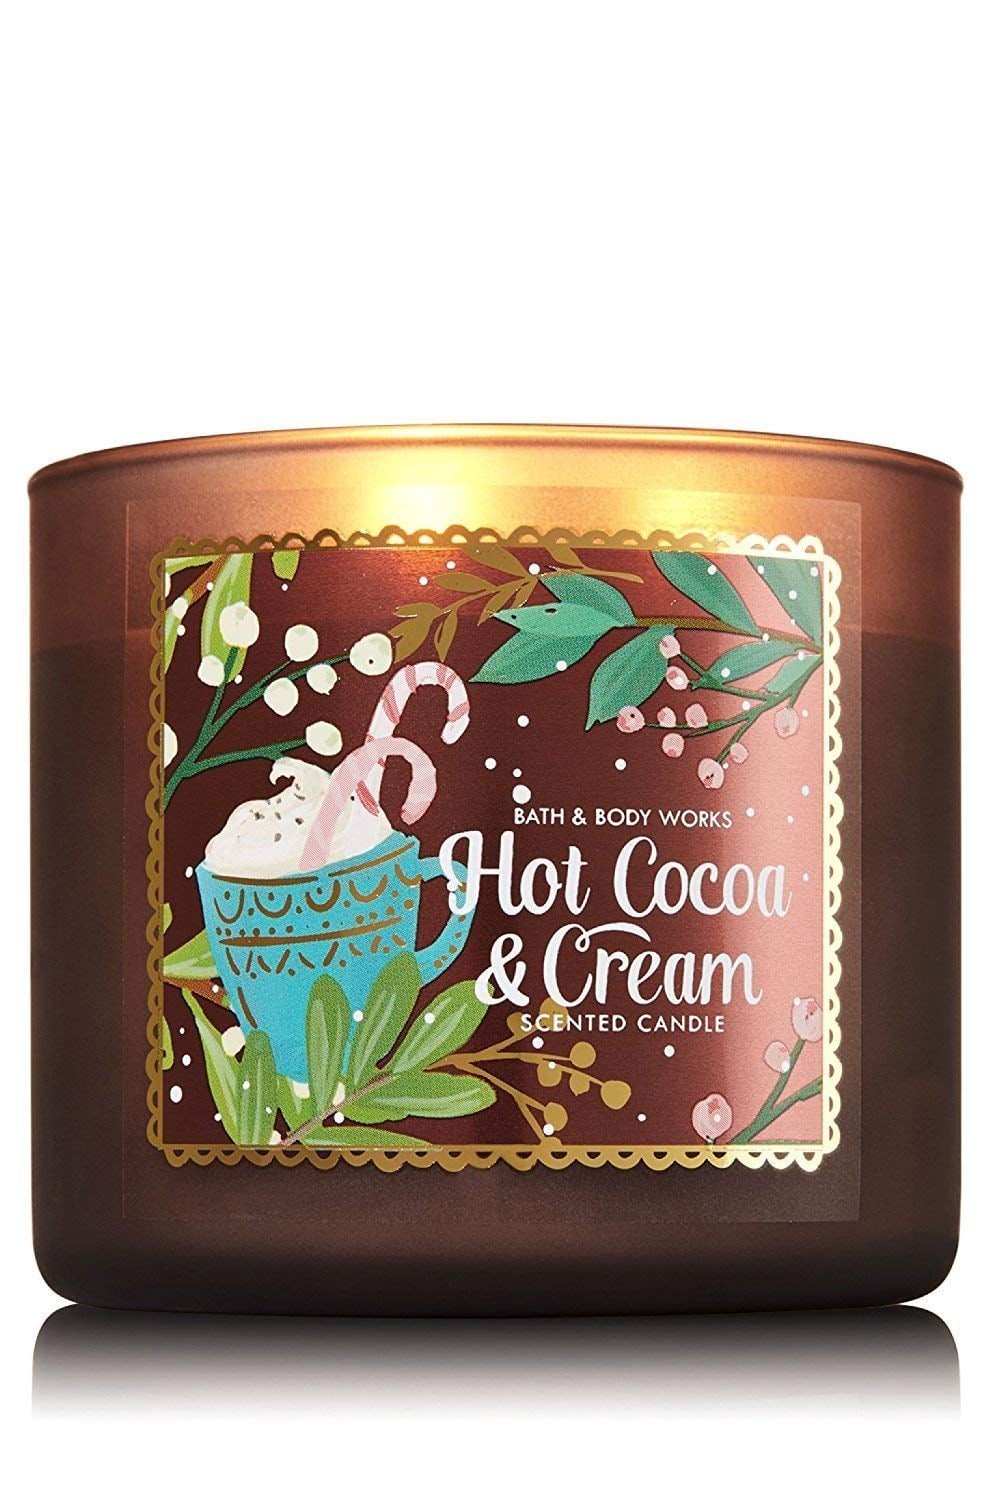 Bath body works свечи. Bath and body works Candles. Body Candle.